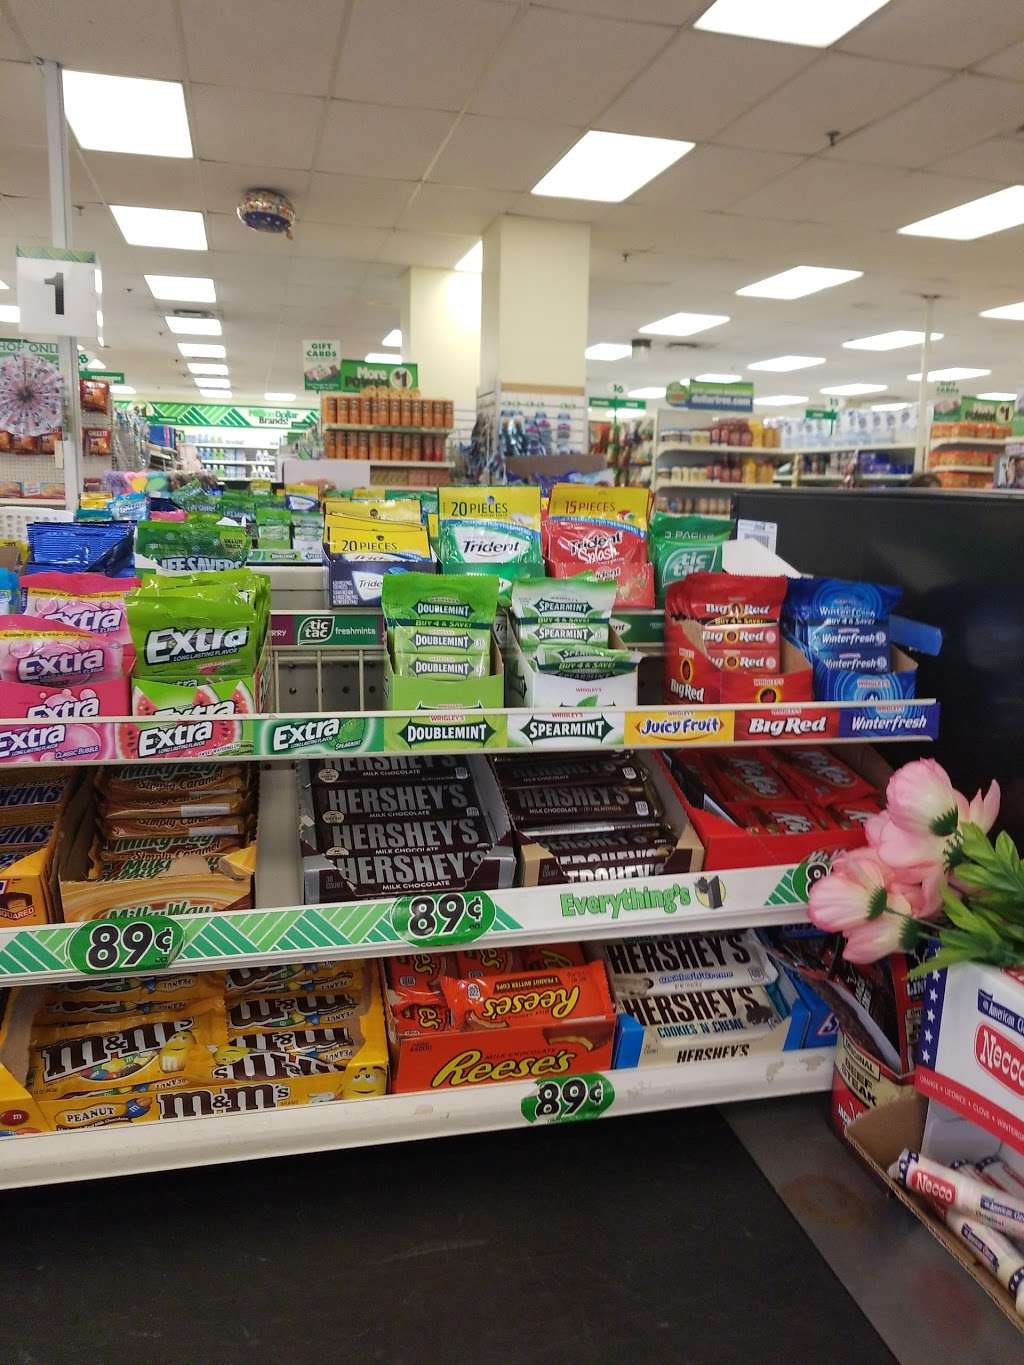 Dollar Tree | 1991 Sproul Rd, Broomall, PA 19008 | Phone: (610) 557-4225